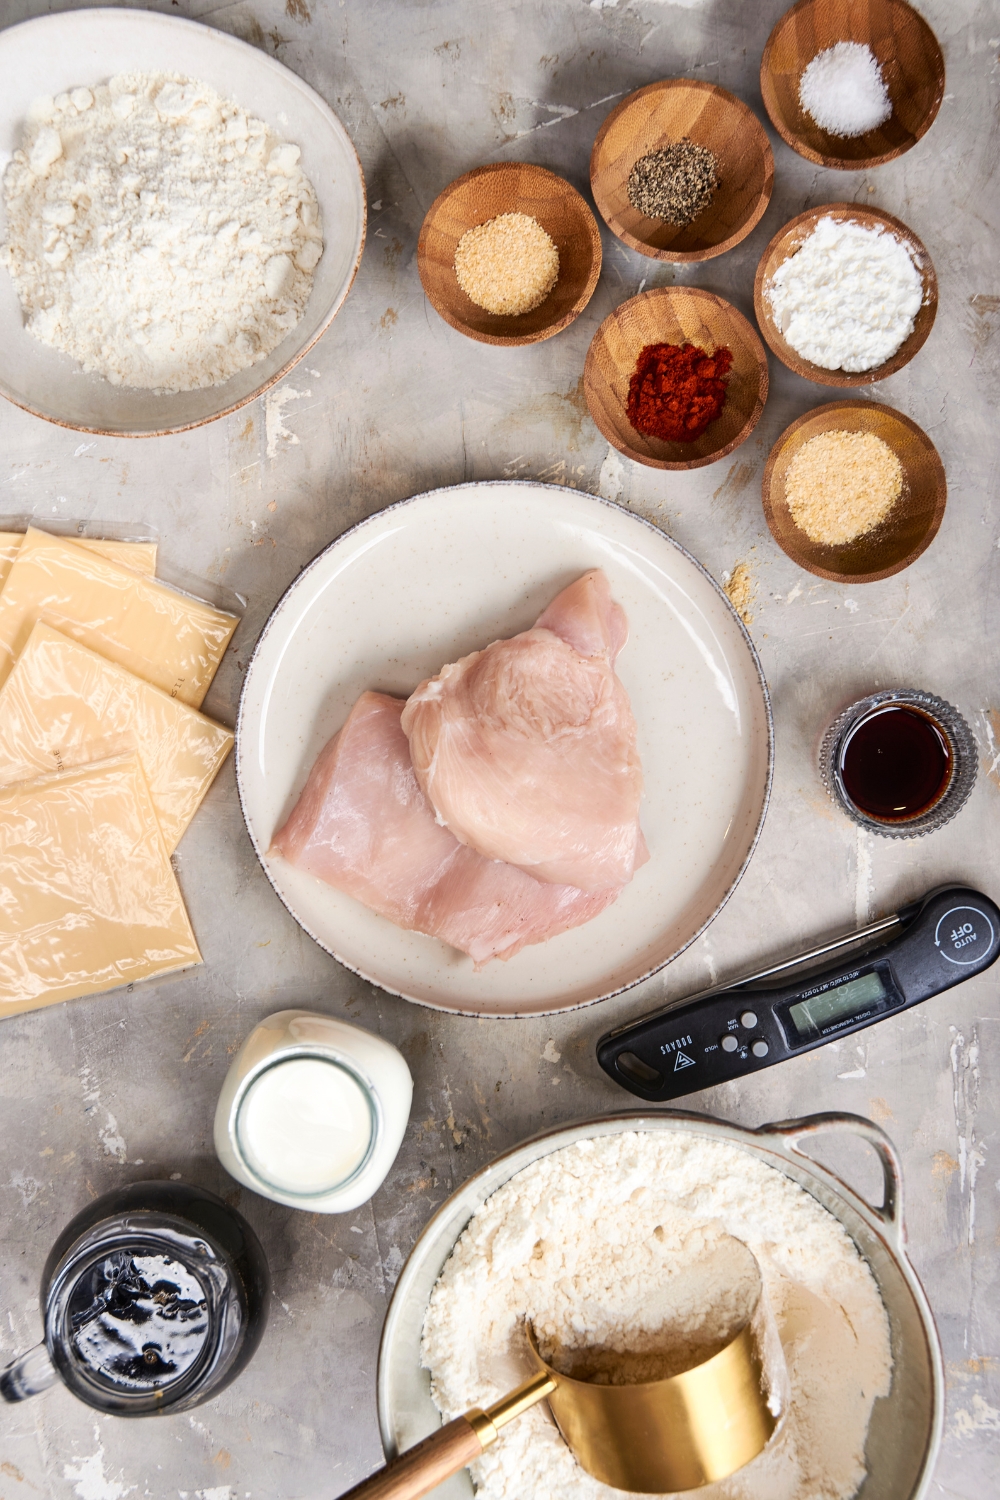 Chicken, seasonings, sliced cheese, flour, buttermilk, and maple syrup are all in separate containers on a gray counter top.